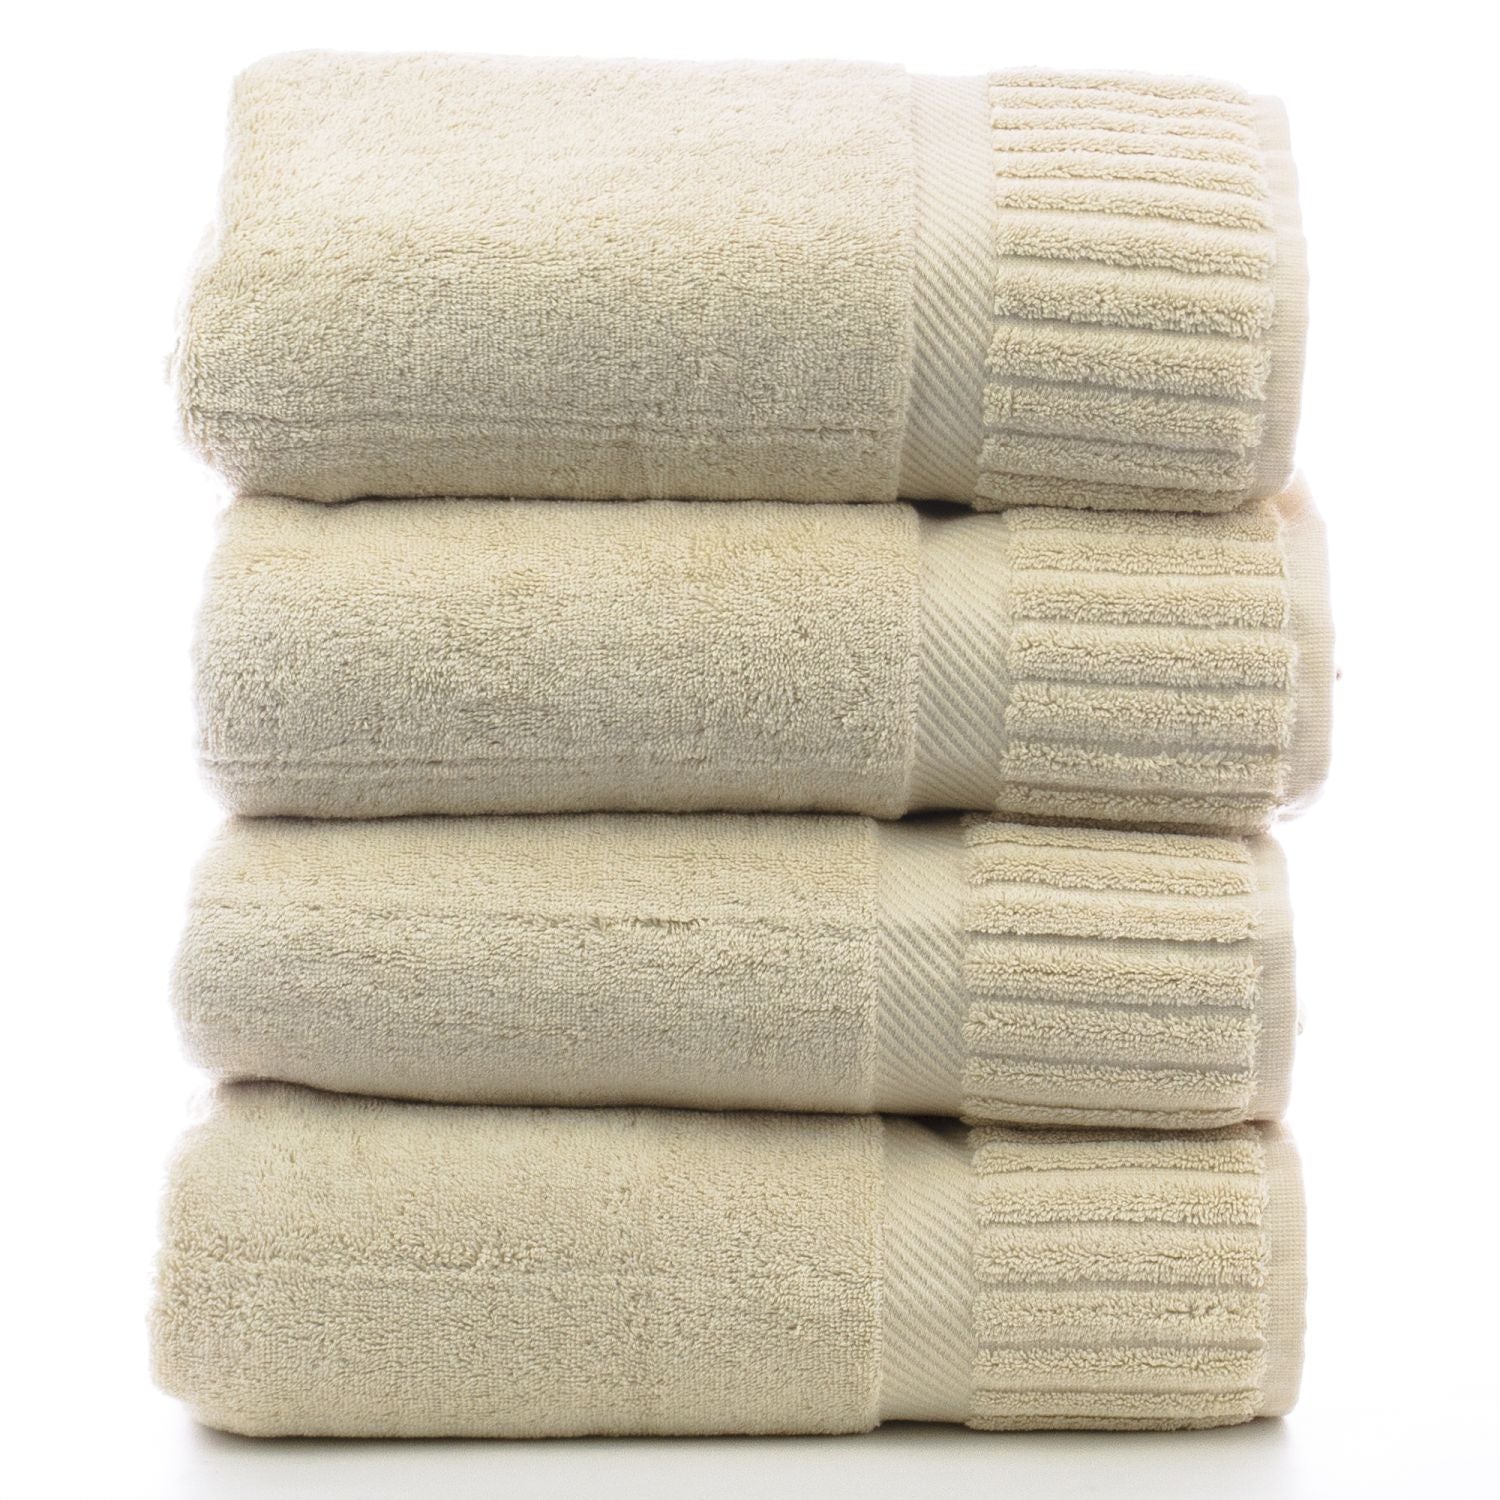 Hotel Luxury Collection - Bath Towels and Bath Sheets